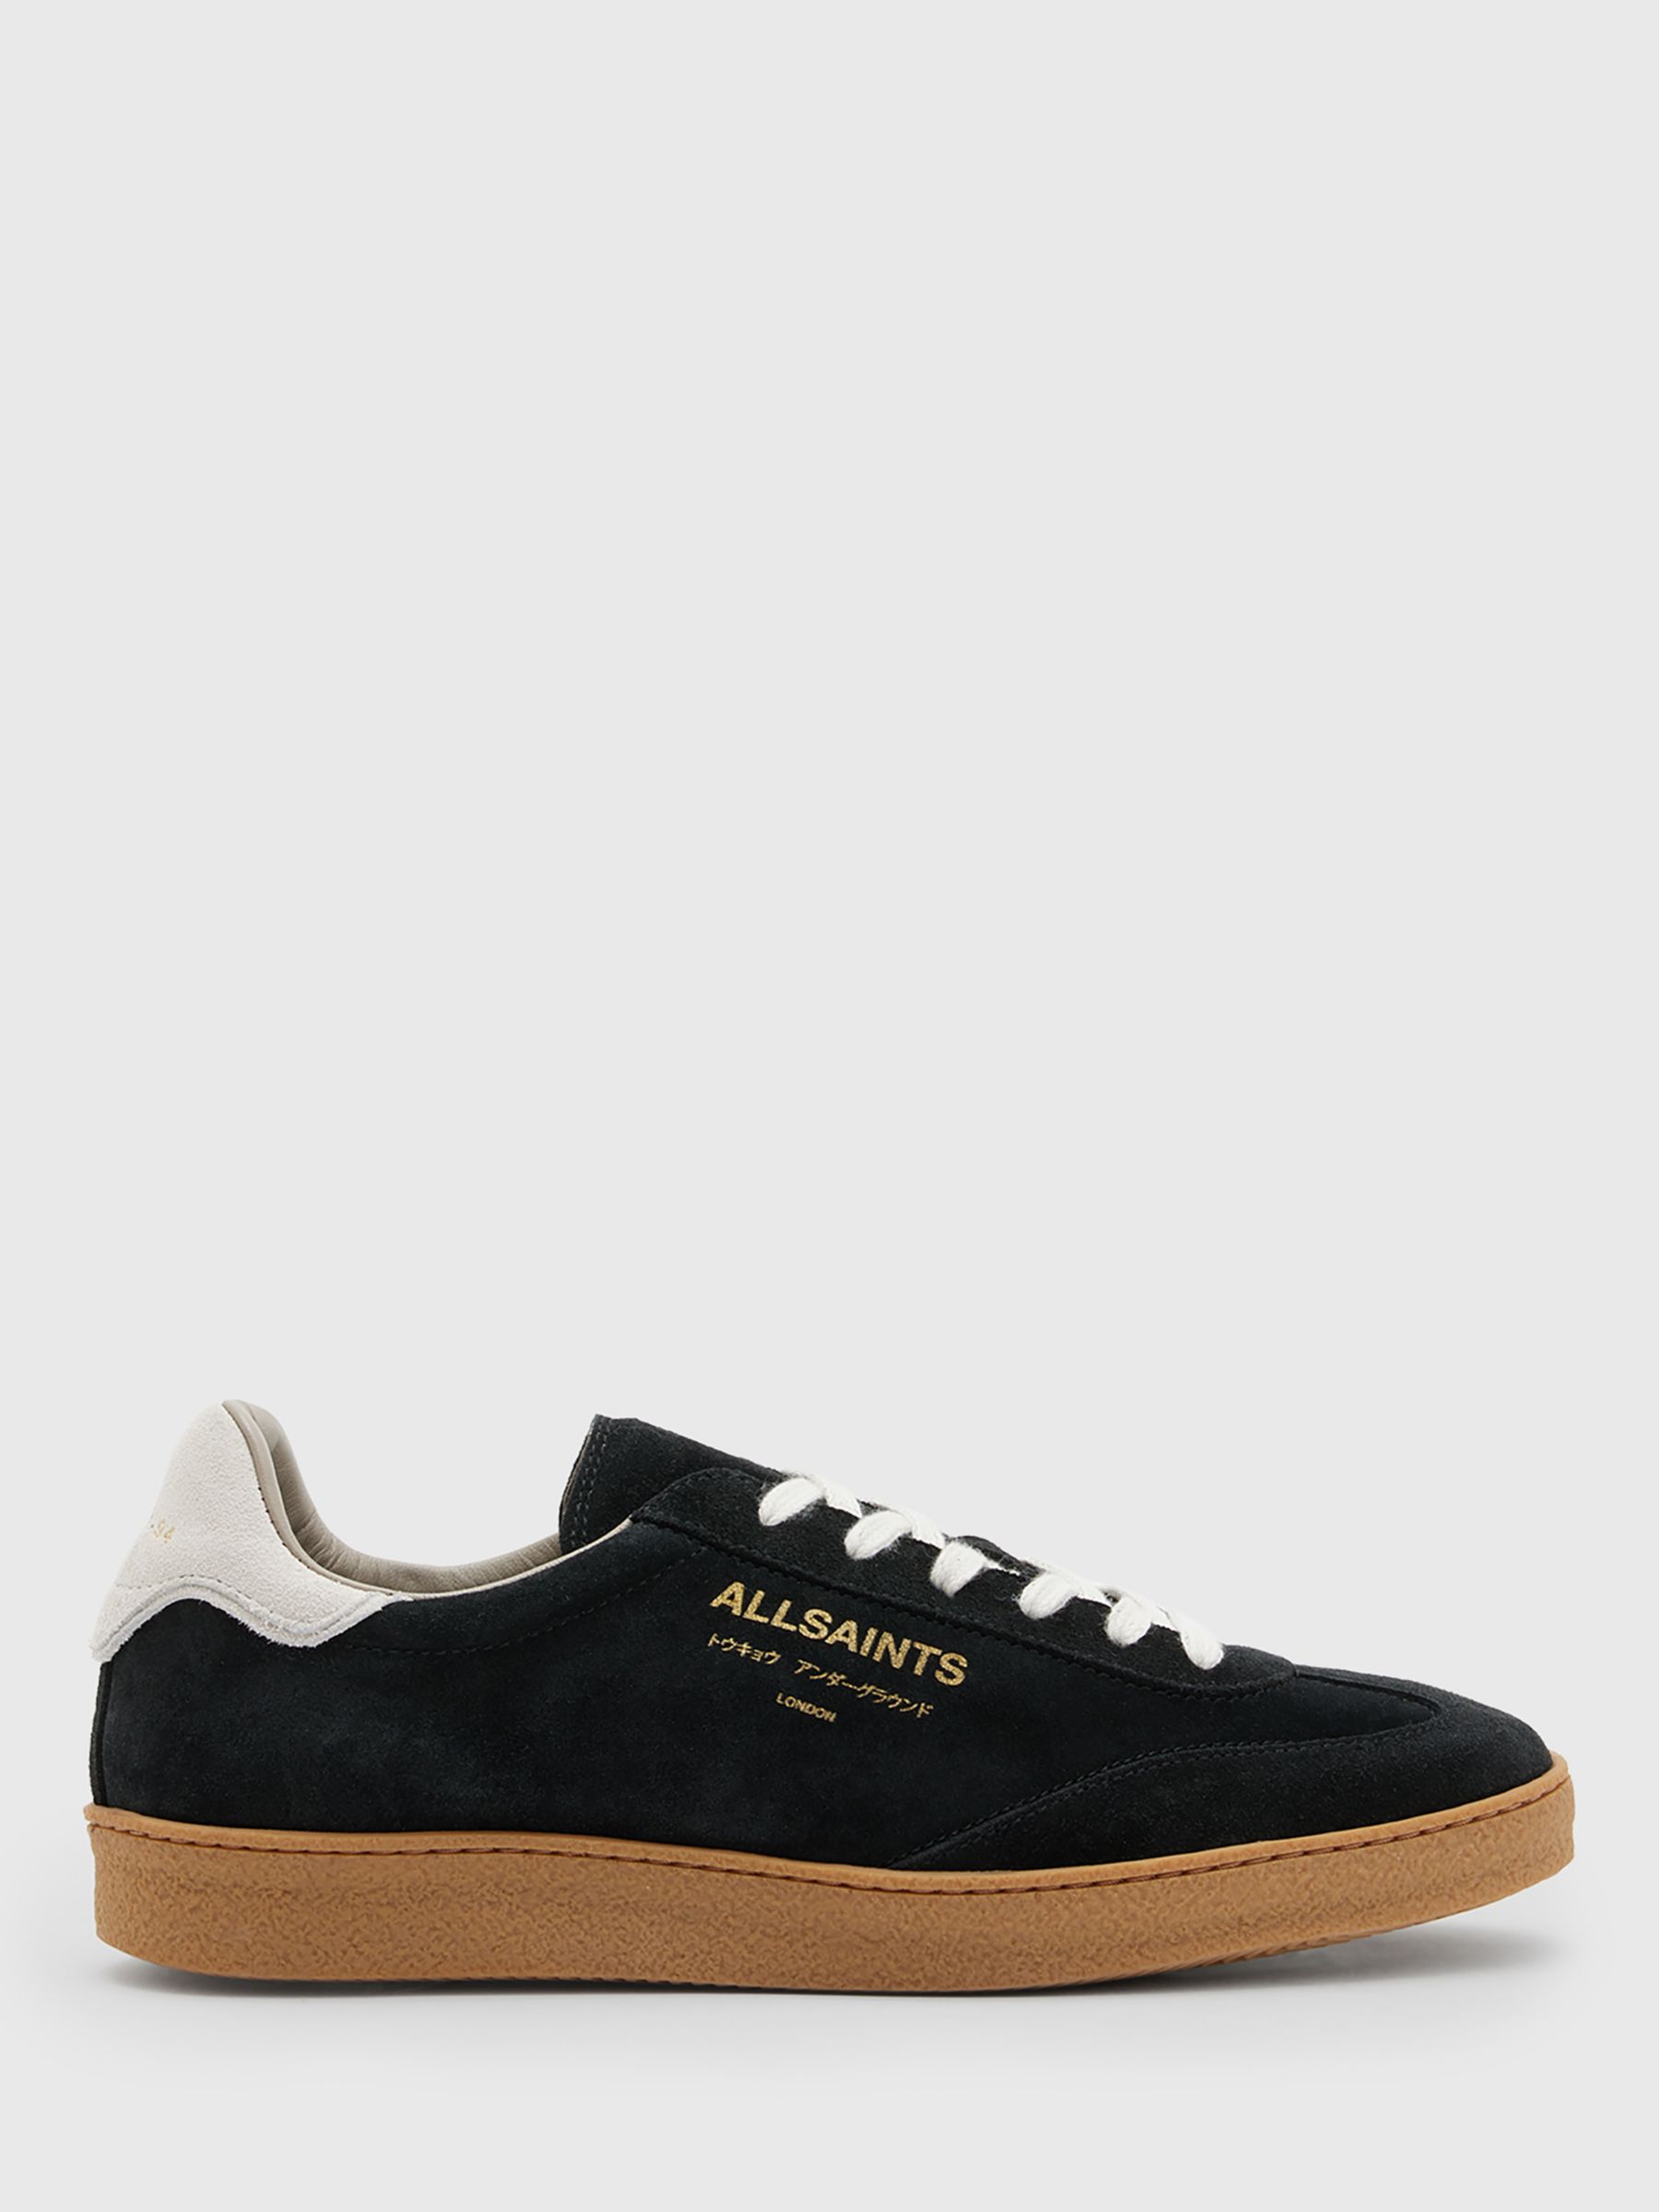 AllSaints Thelma Suede Trainers, Black/White at John Lewis & Partners